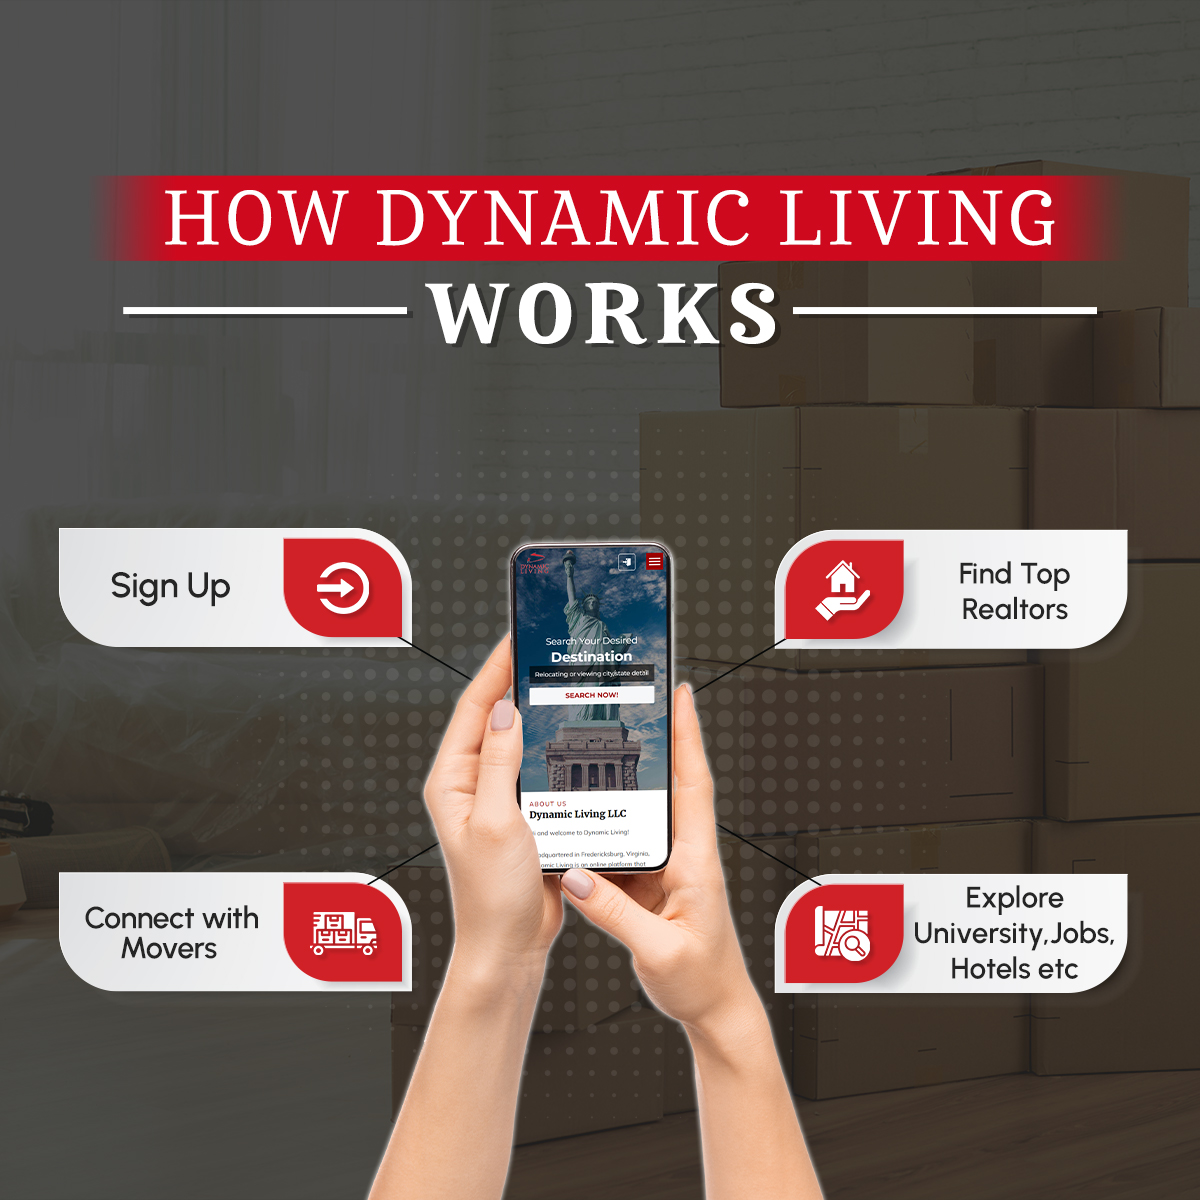 Everything you need to start your new life in one place.
Sign up for #DynamicLiving today and start your new life on the right foot.
thedynamicliving.com

#Moving #movinghouse #USA #relocation  #househunting #realtors #homebuyers #homebuying